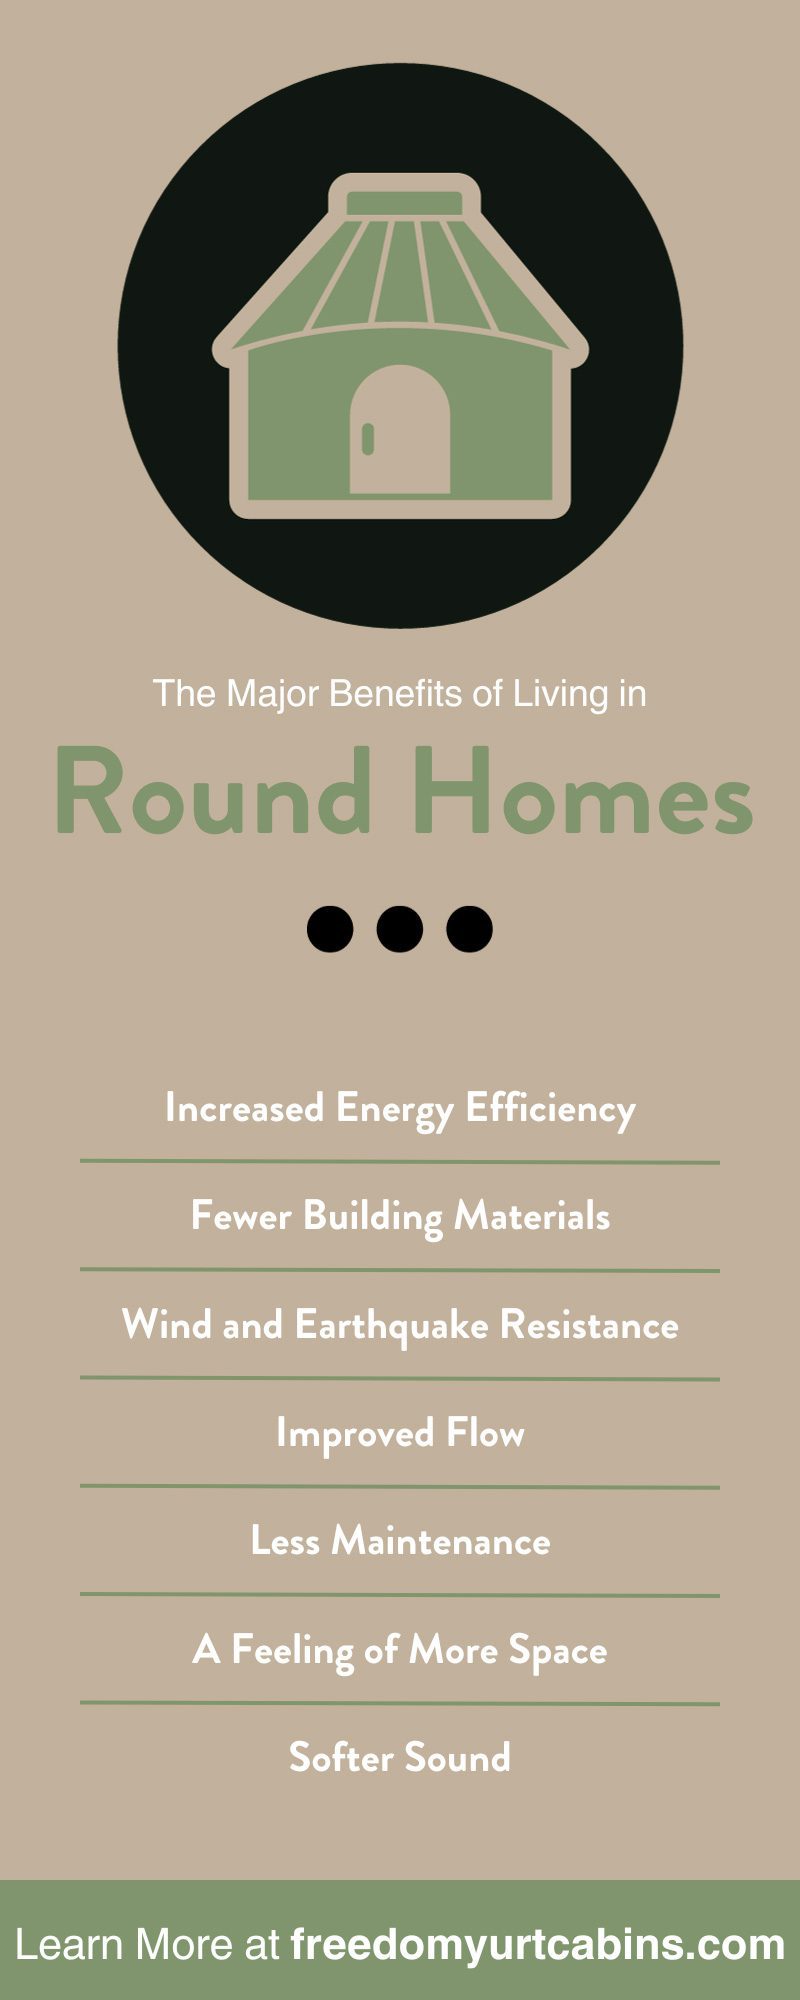 The Major Benefits of Living in Round Homes
